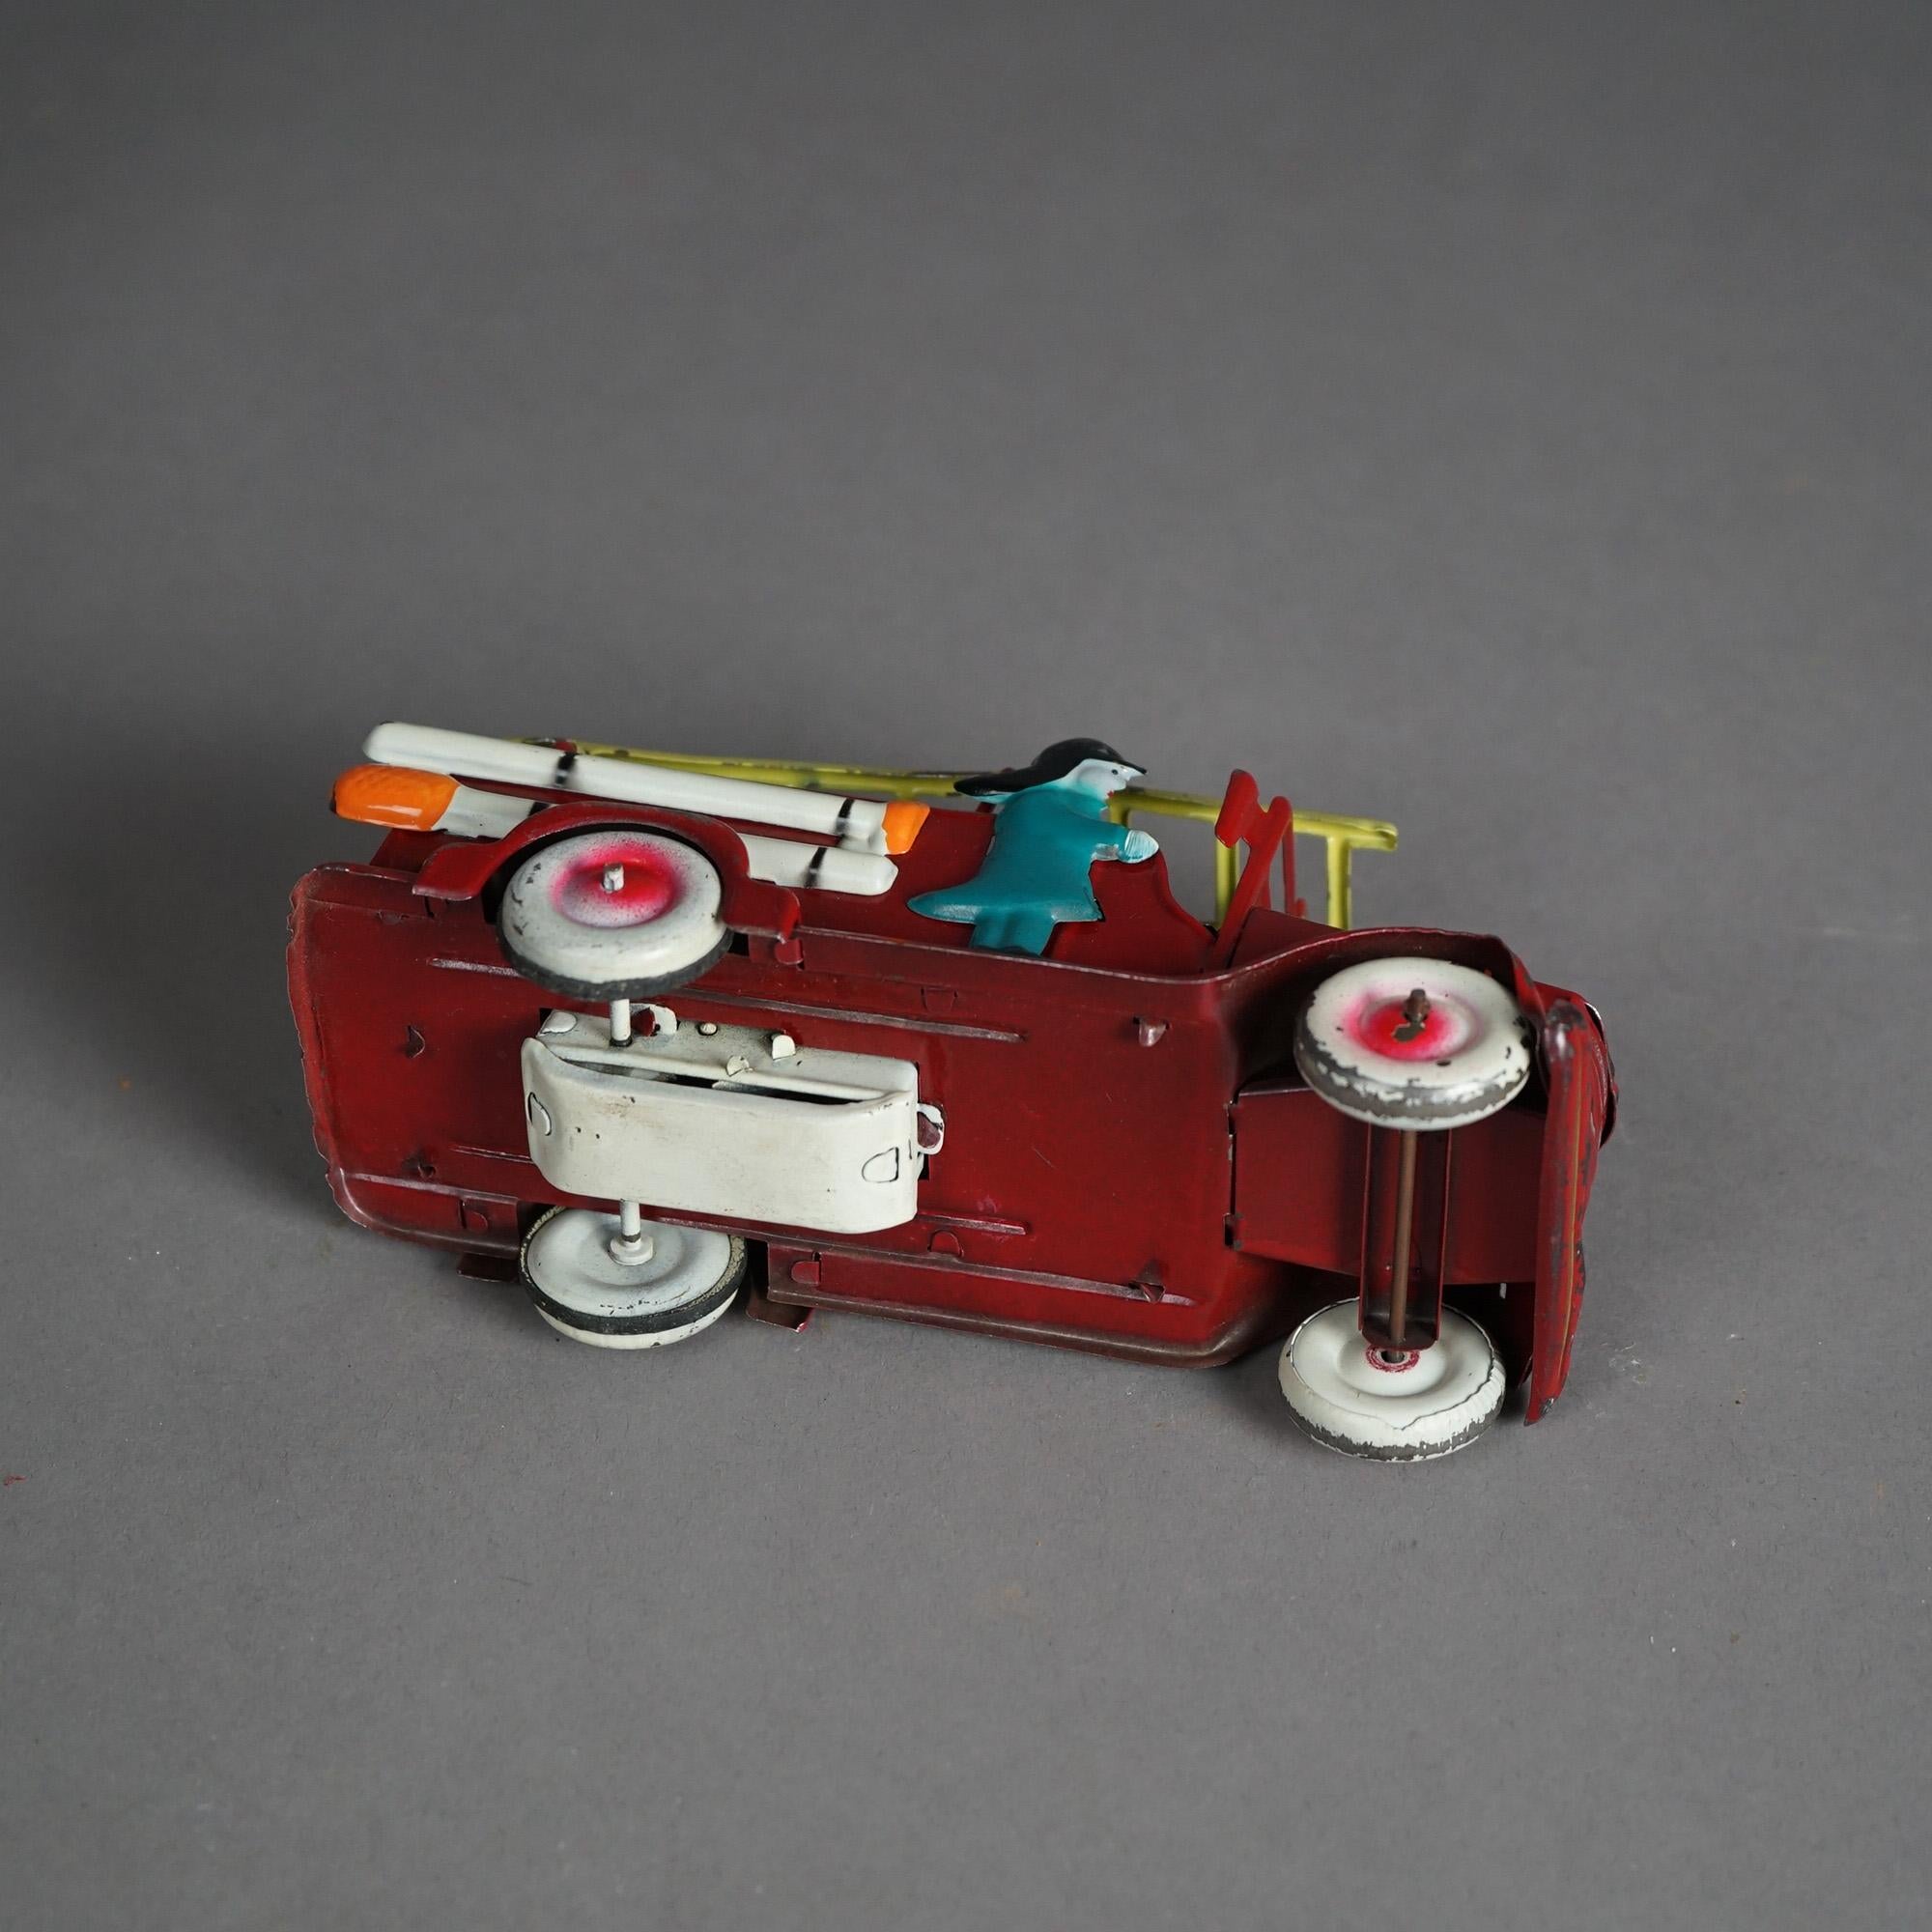 Japanese Tin Litho Toy Fire Engine In The Original Box Circa 1950 7